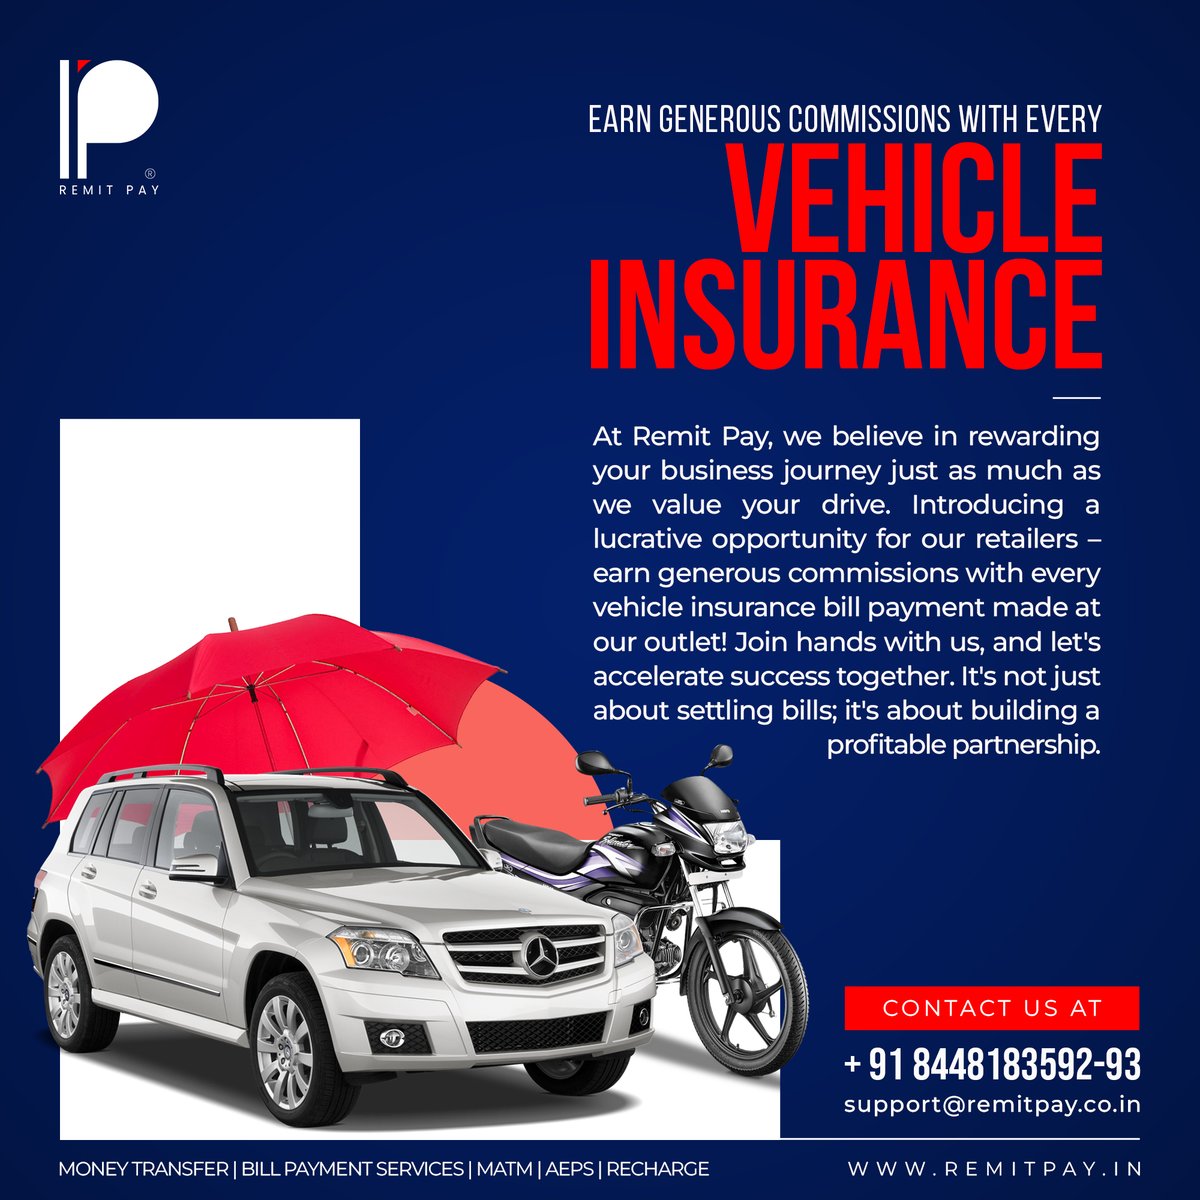 Earn Generous Commissions with Every Vehicle Insurance!

#vehicle #vehicles #vehicleinsurance #Insurance #insurance #commission #commissions #reward #Rewards #rewards #retailers #RETAILERS